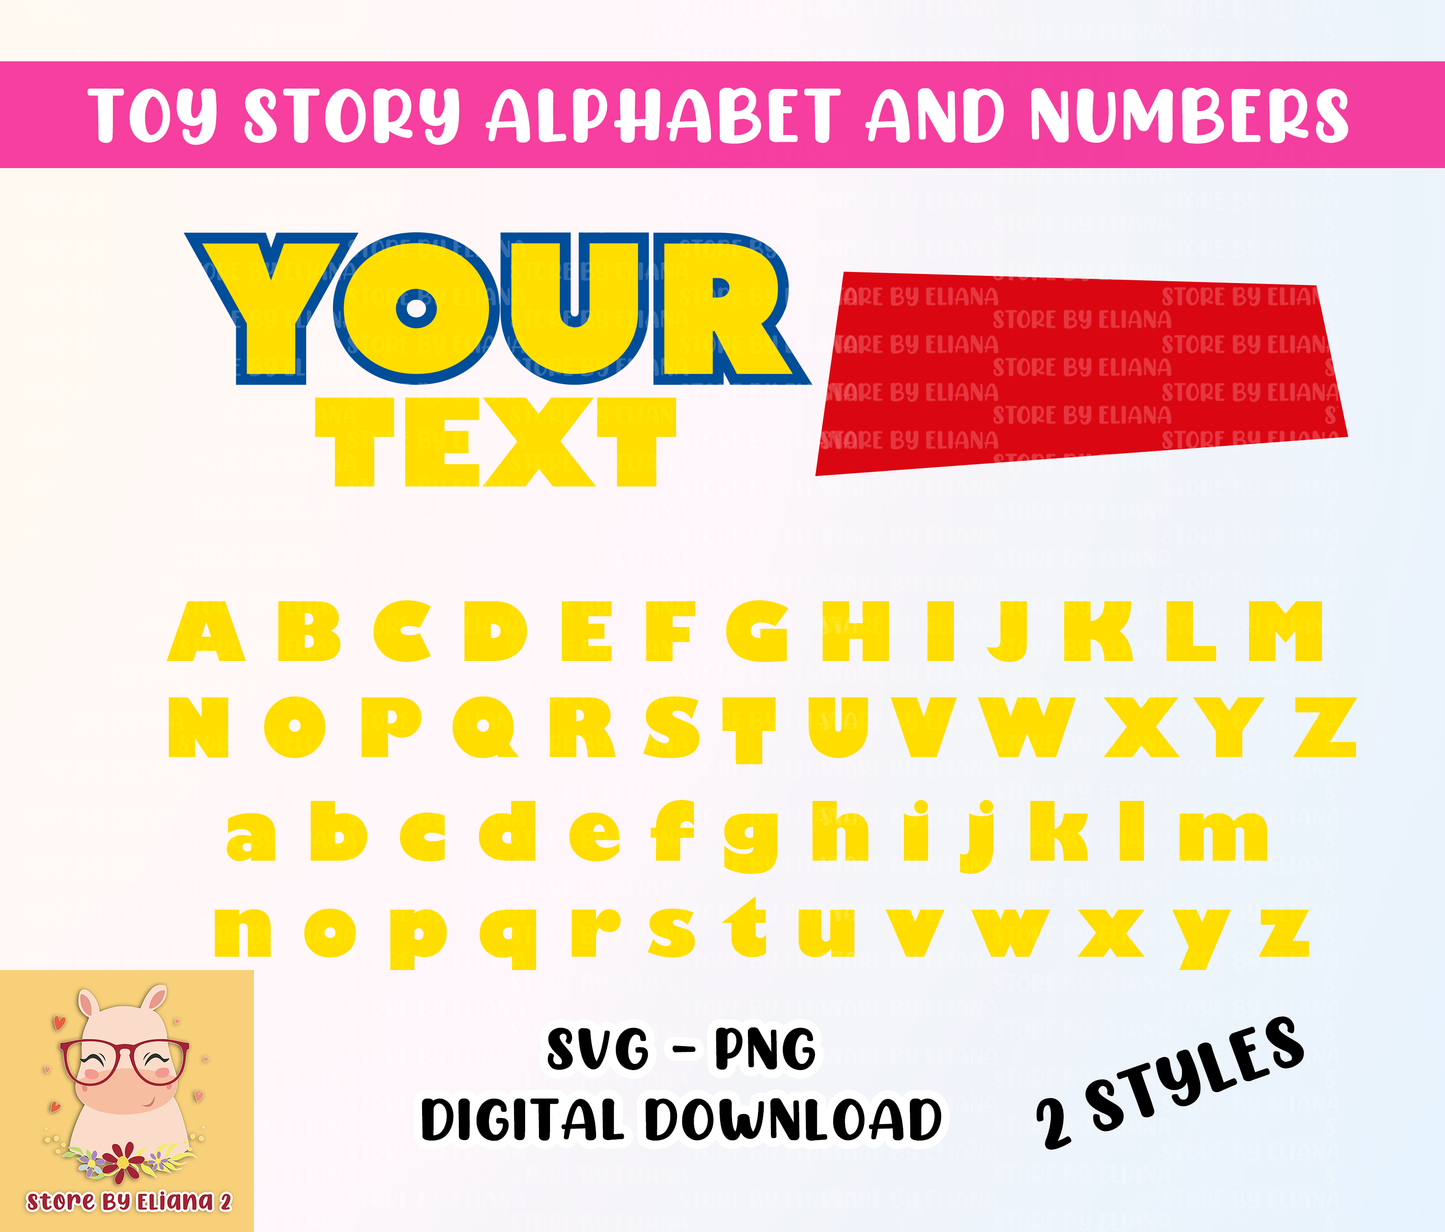 Toy story font svg, toy story alphabet and numbers svg, png, cricut, cut file, instant download